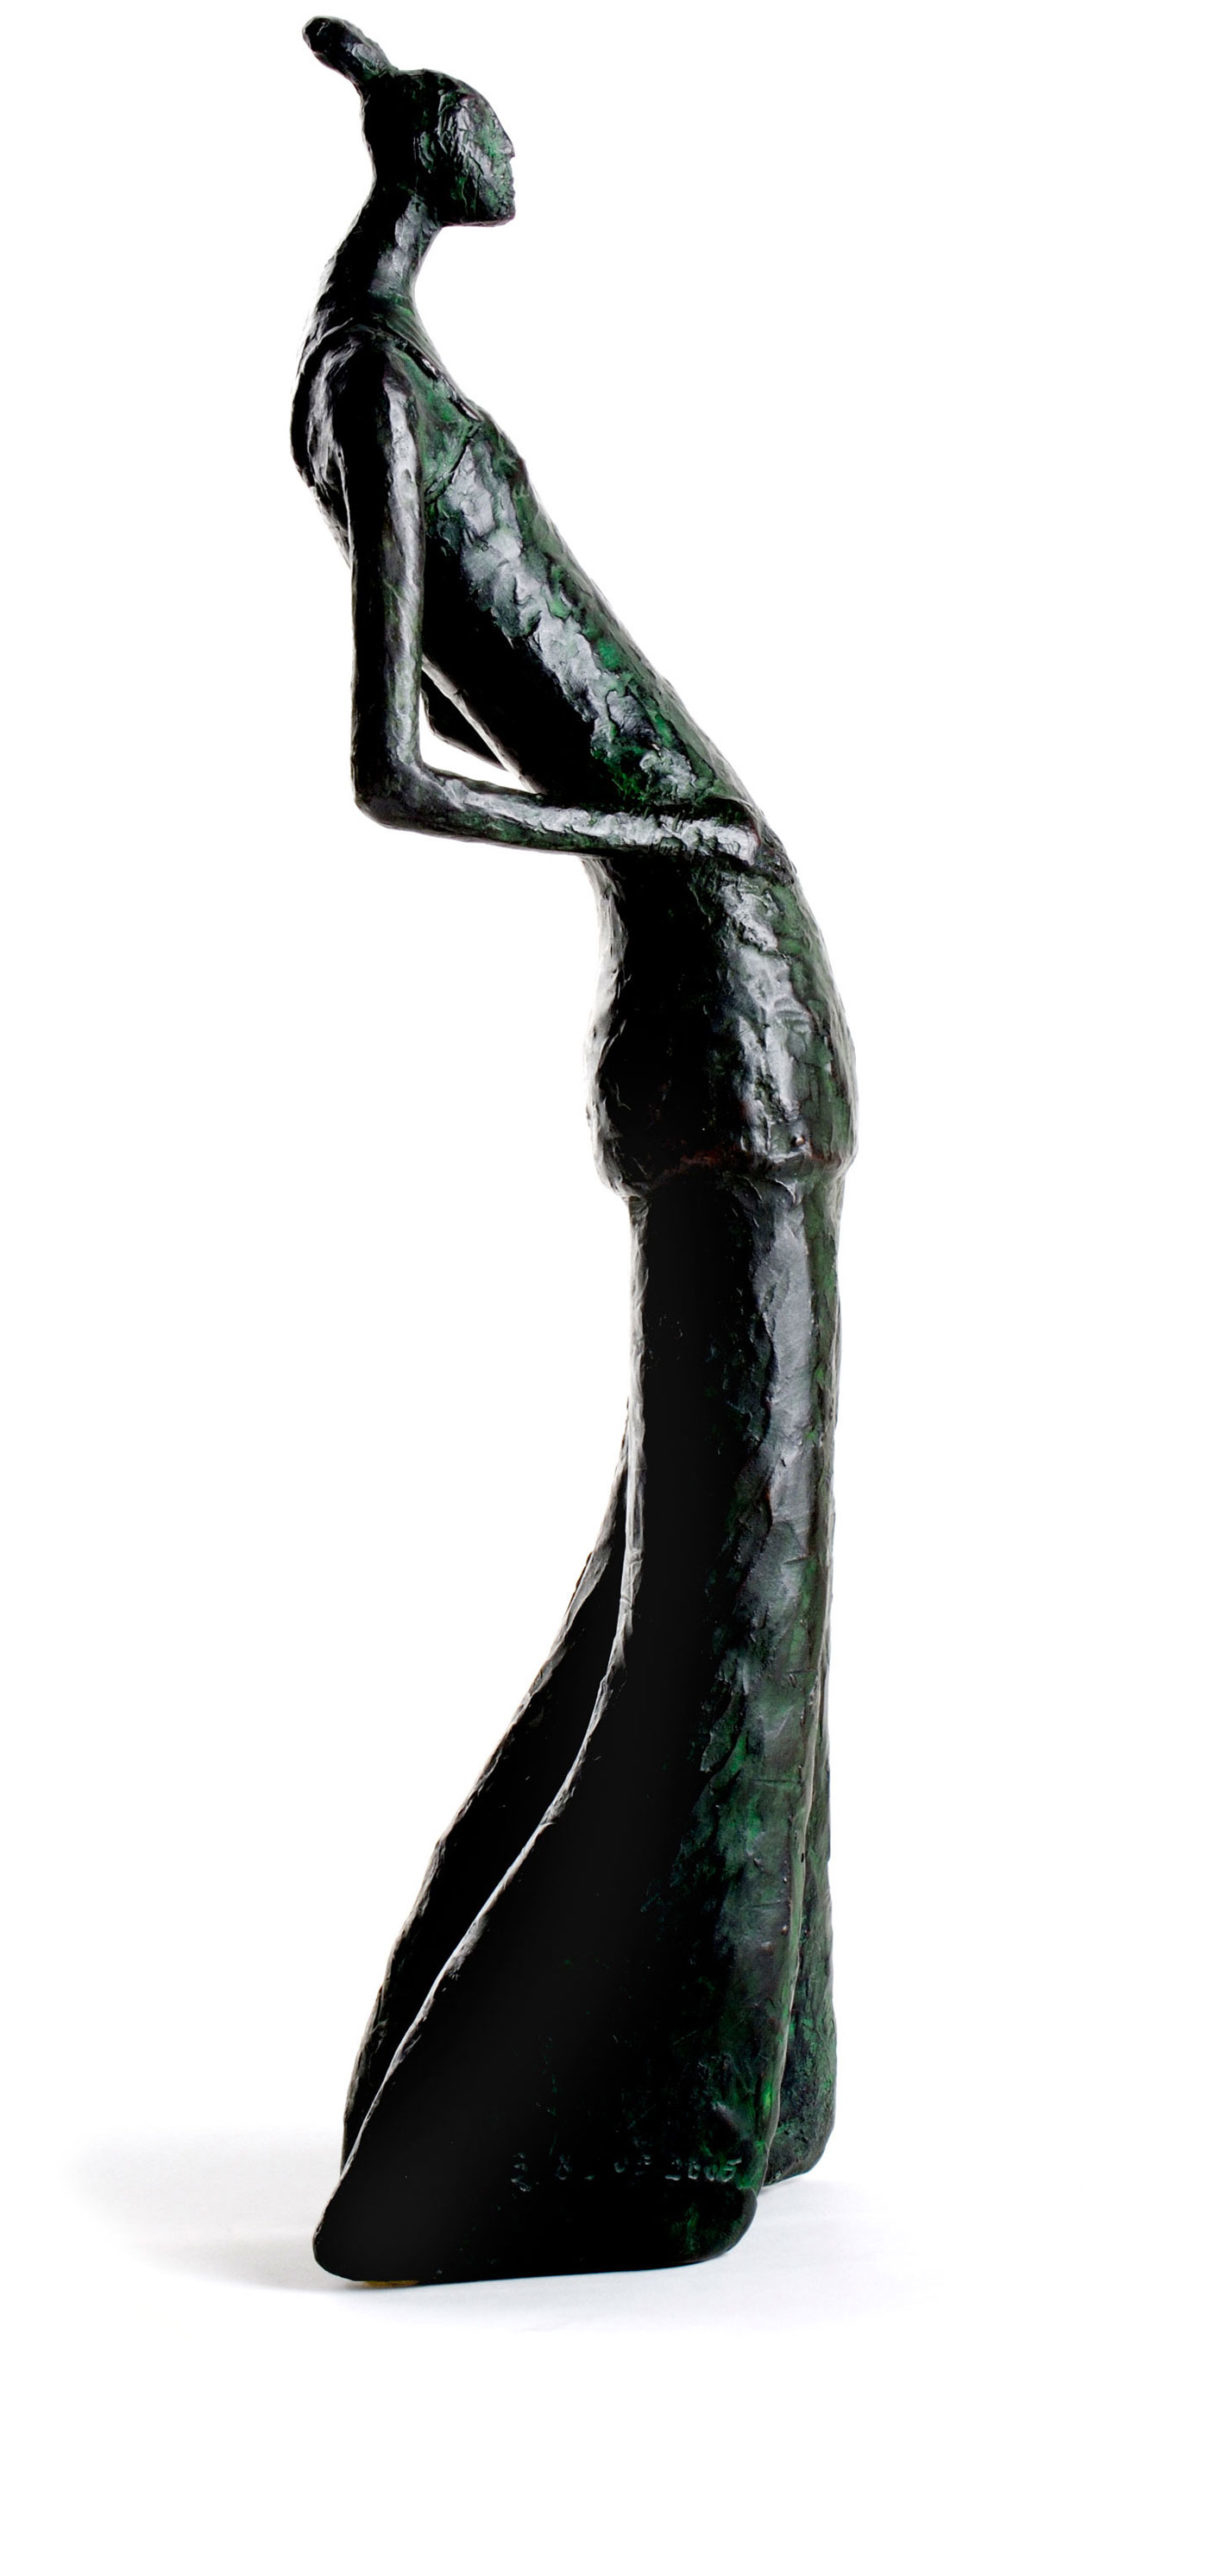 Miss trendy by French sculptor Val - Valérie Goutard - with Sculptureval